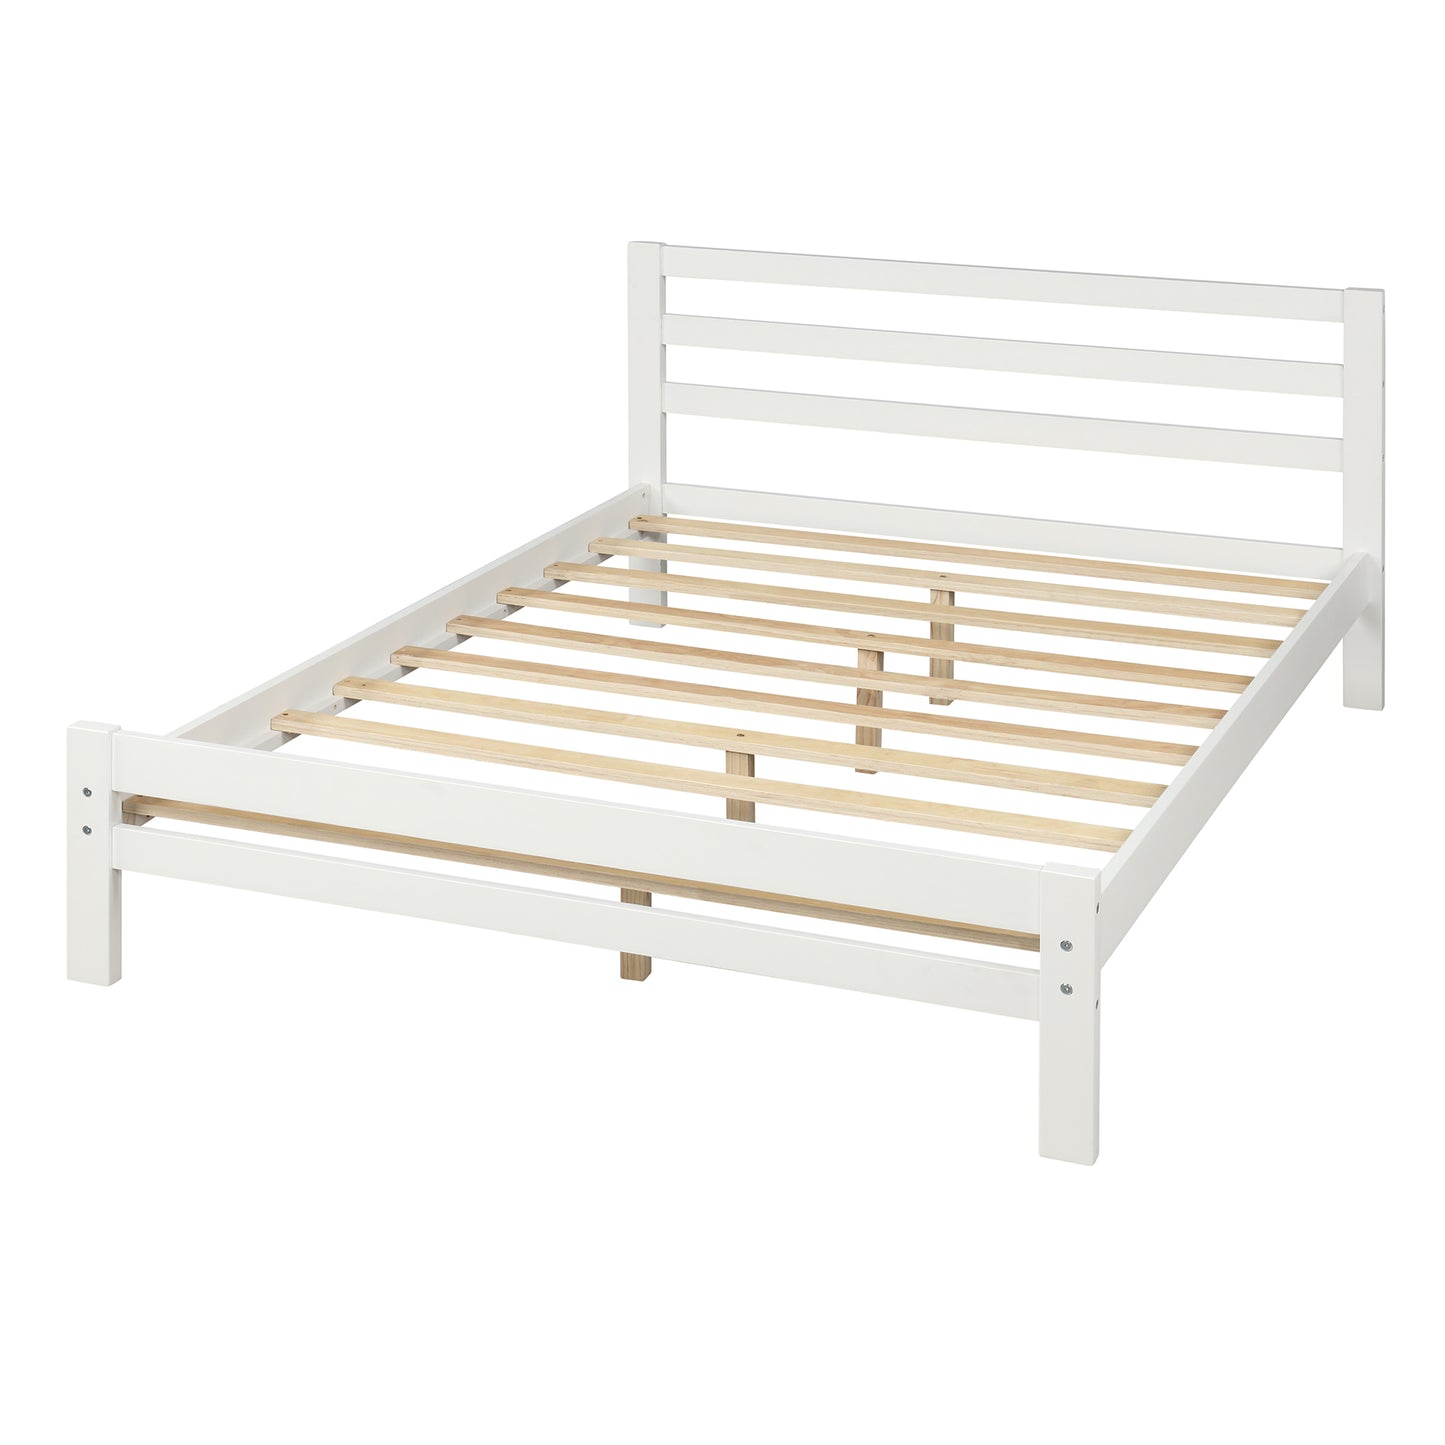 Wood platform bed with two drawers, full (white)